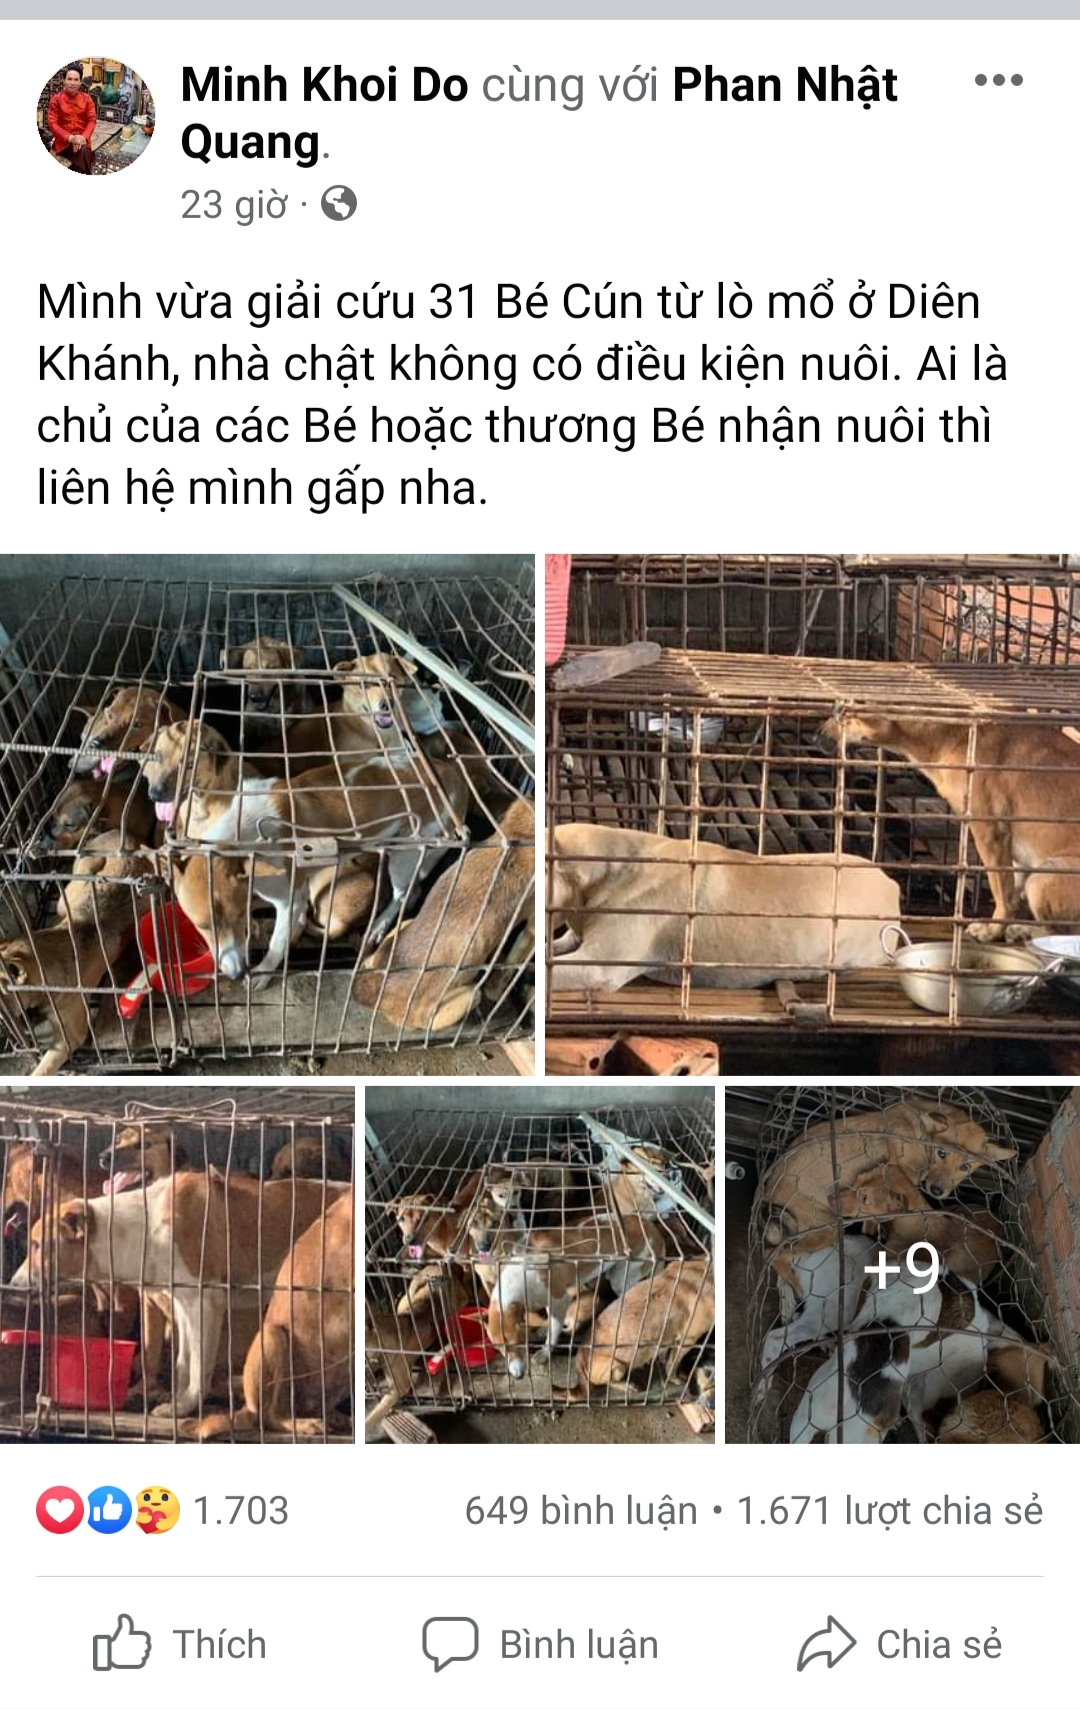 Man rescues 31 dogs from slaughterhouse in south-central Vietnam